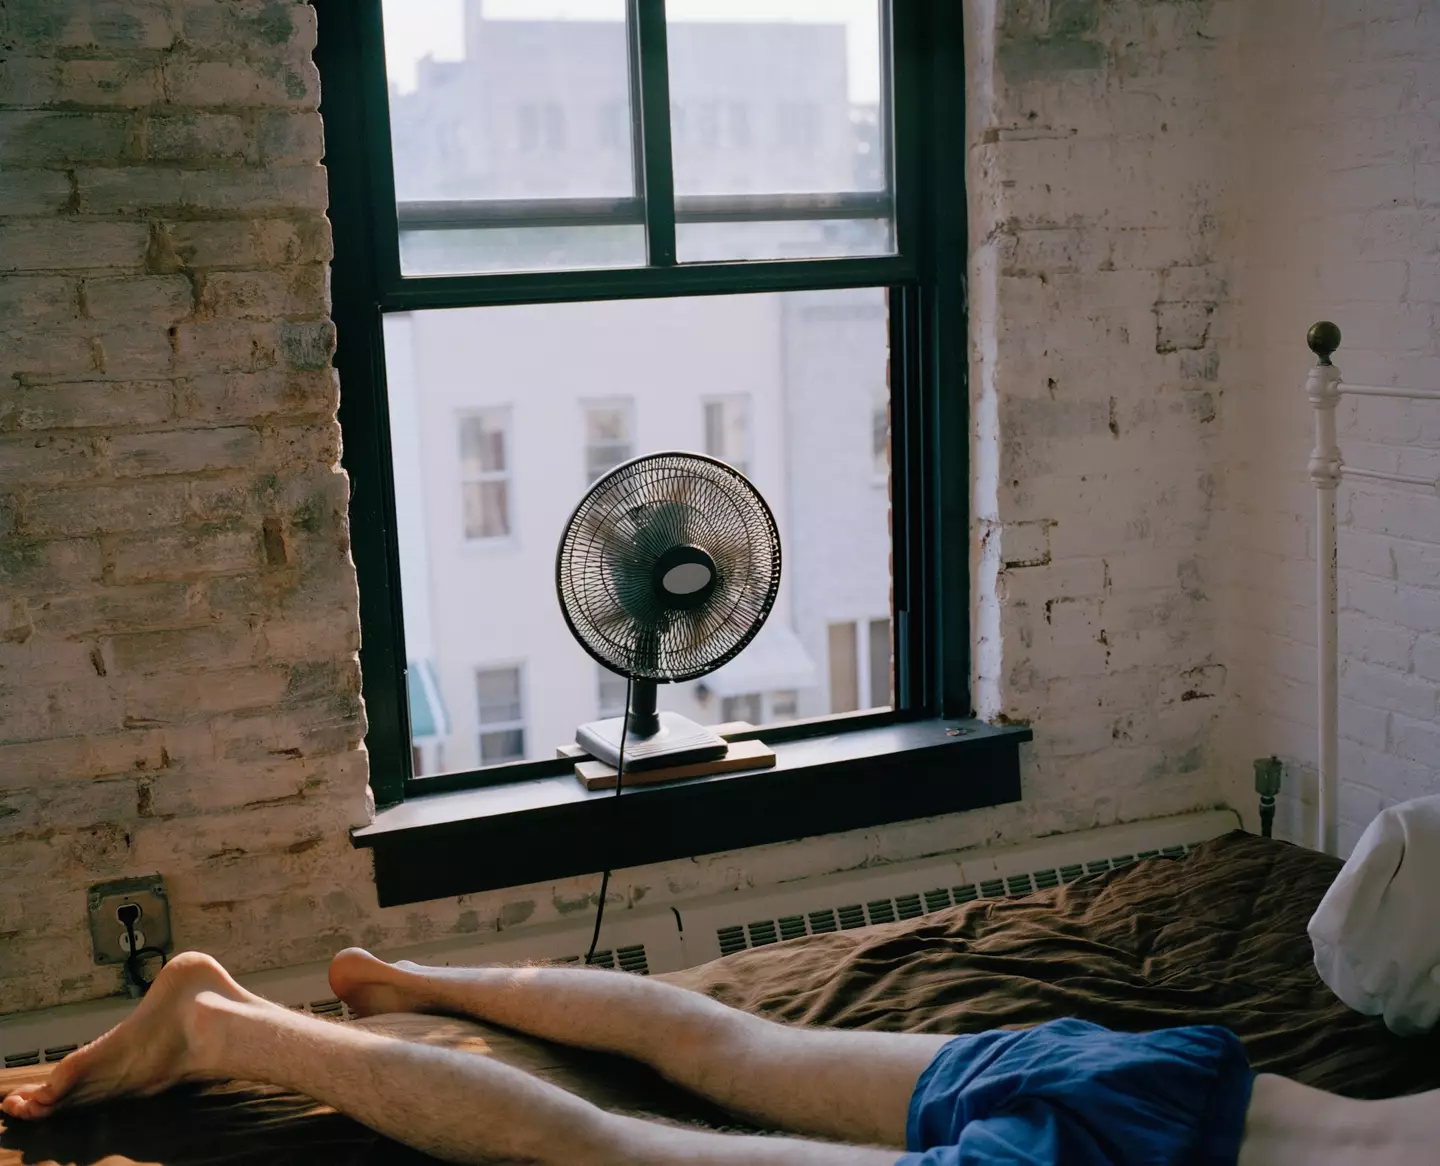 Sleeping next to a fan could be bad for you.